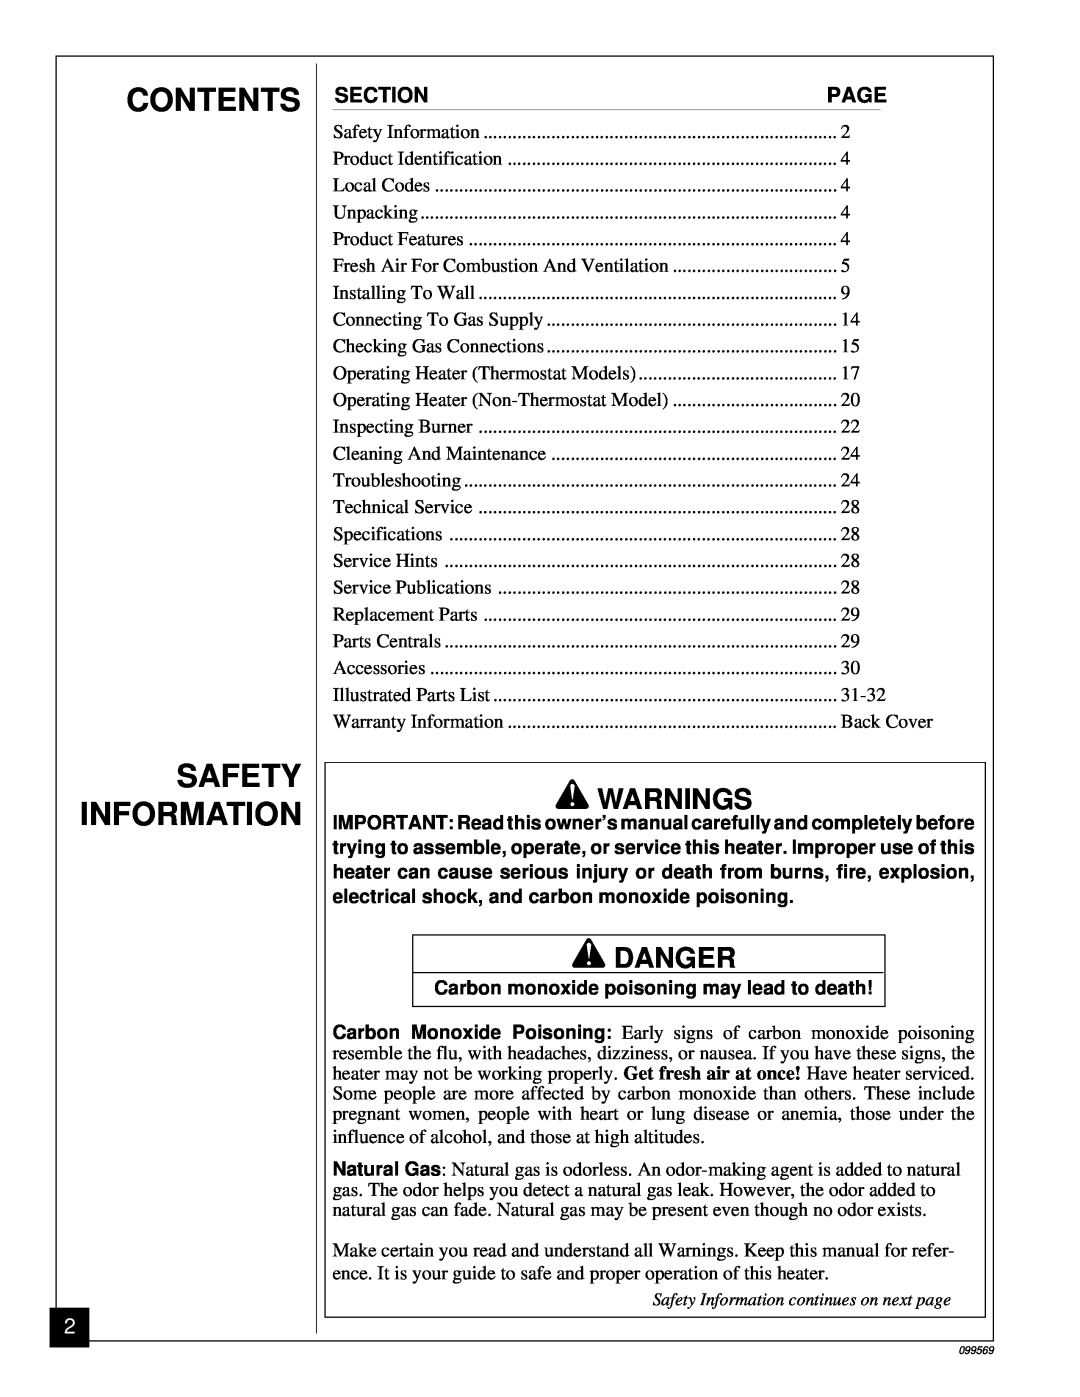 Desa A installation manual Contents, Safety, Information, electrical shock, and carbon monoxide poisoning 